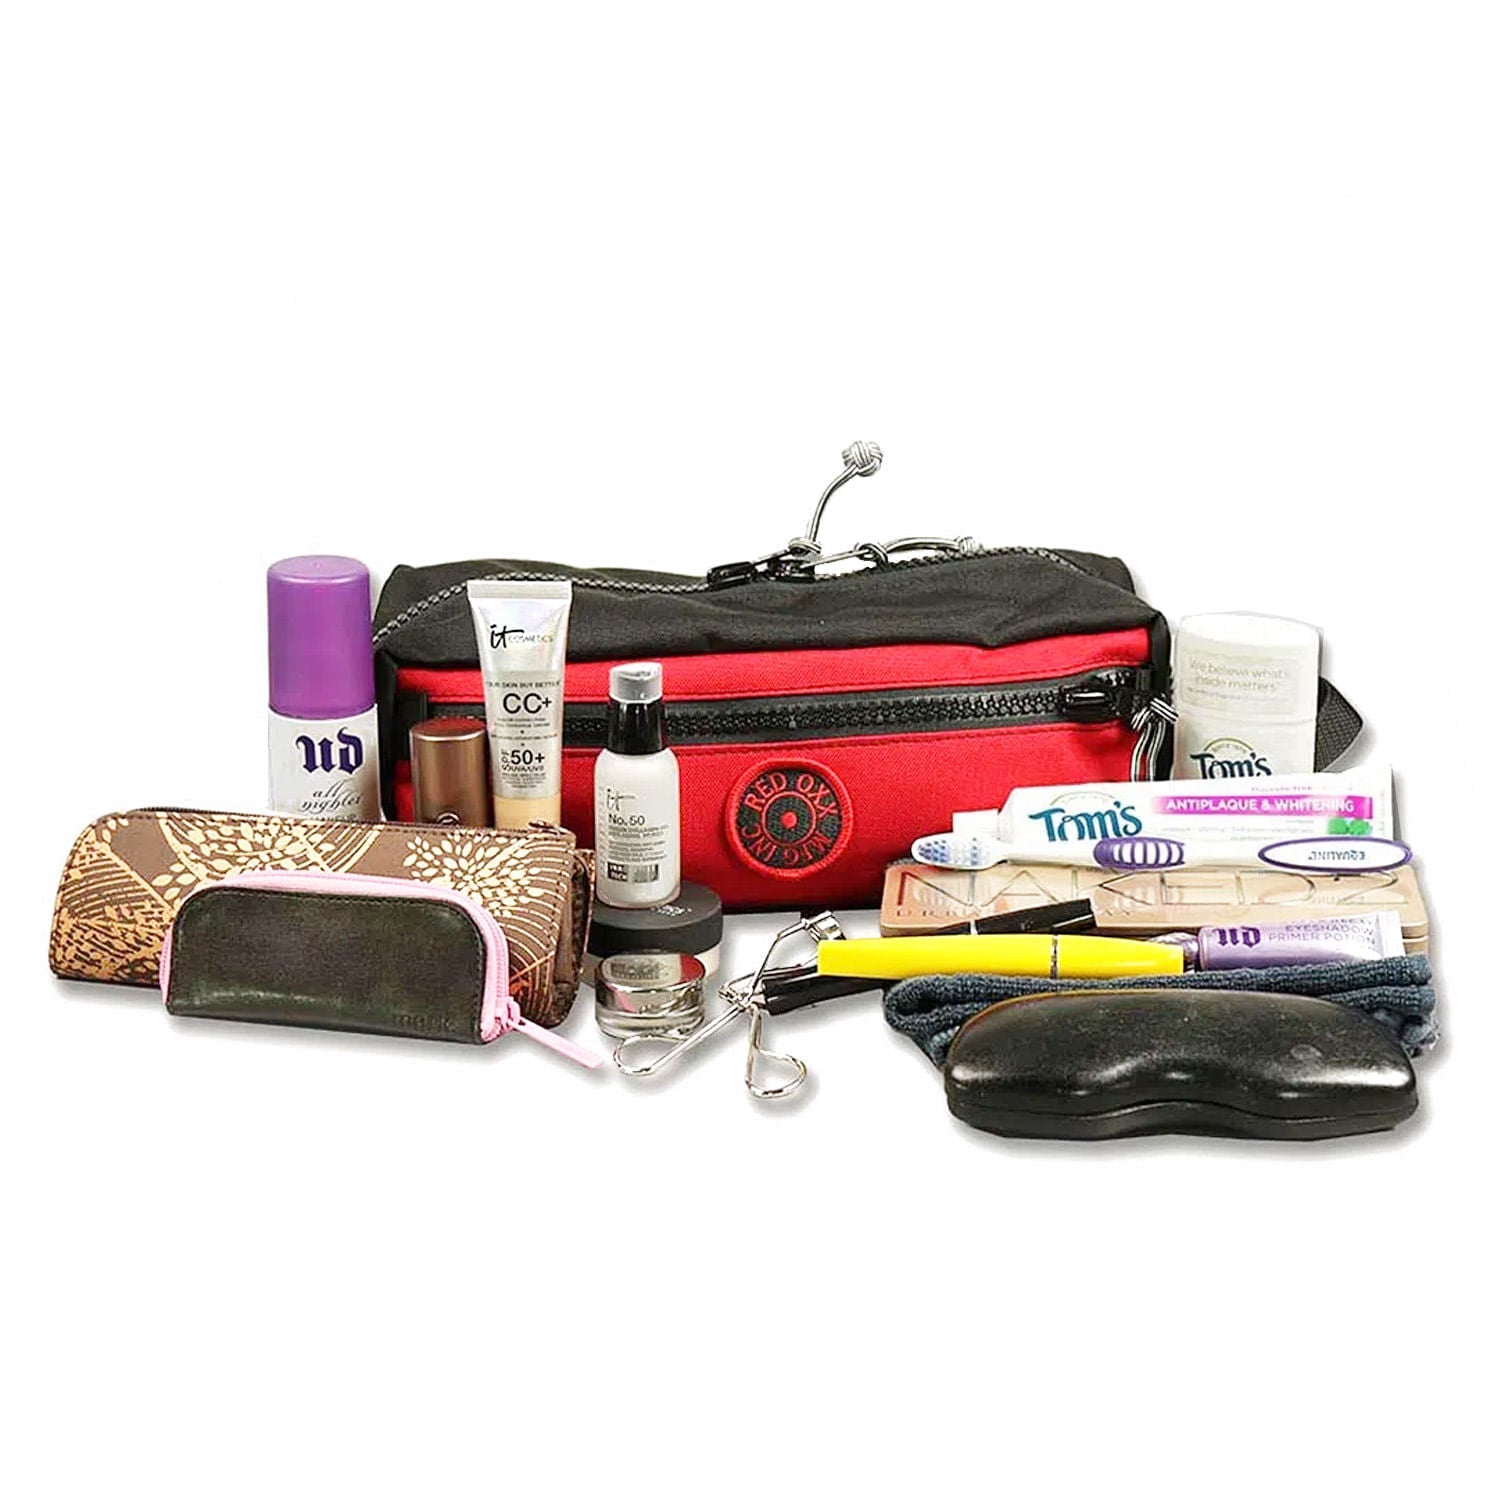 Nomad Shave Kit will all of these items. 